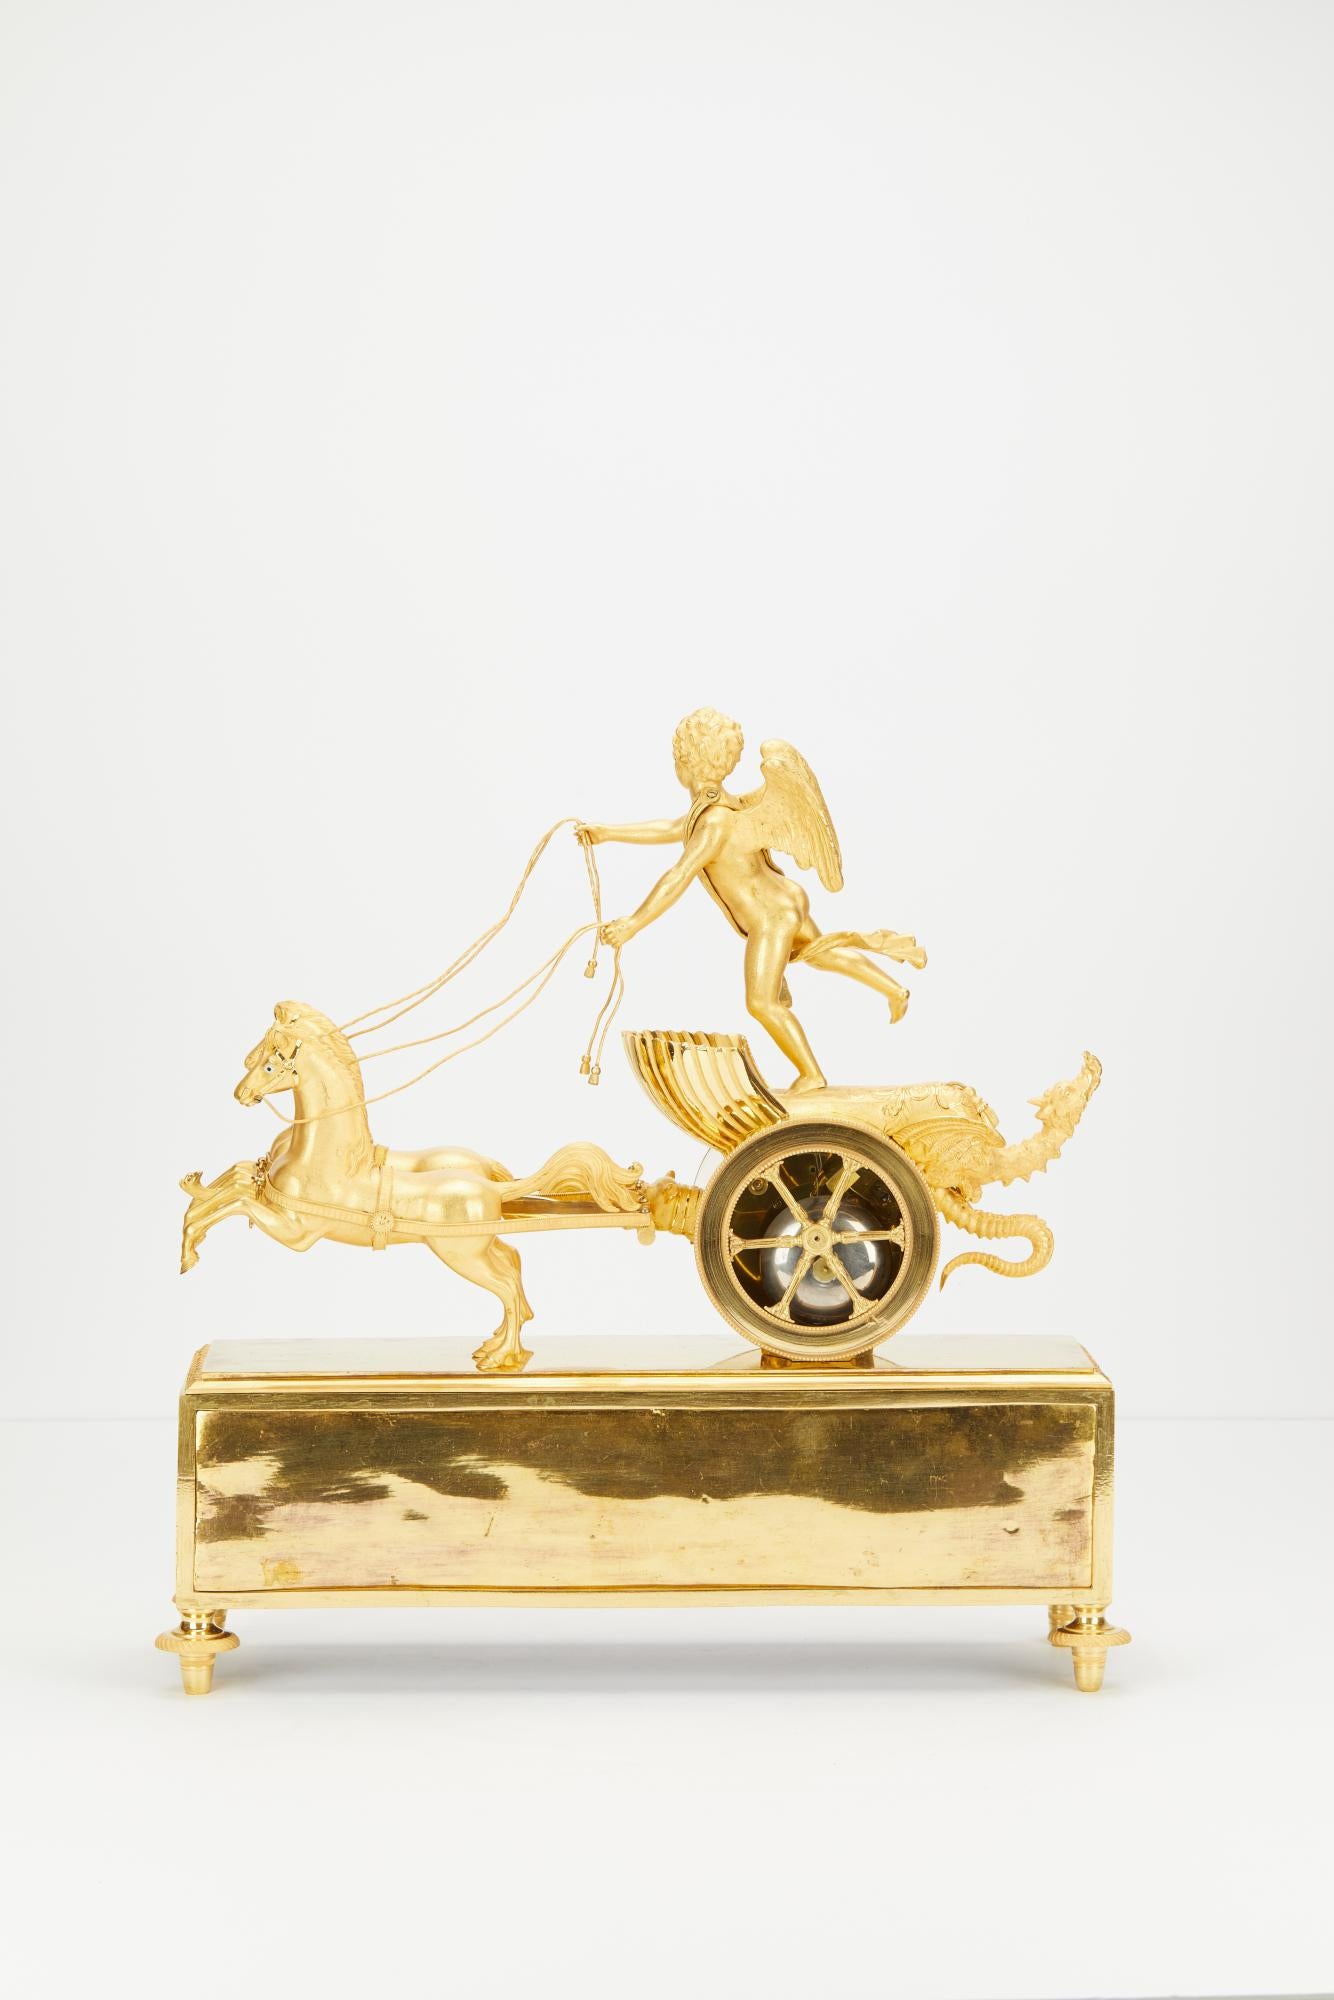 A charming French Empire ormolu chariot clock, circa 1810 with 8-day movement, striking , in its original gilt case.